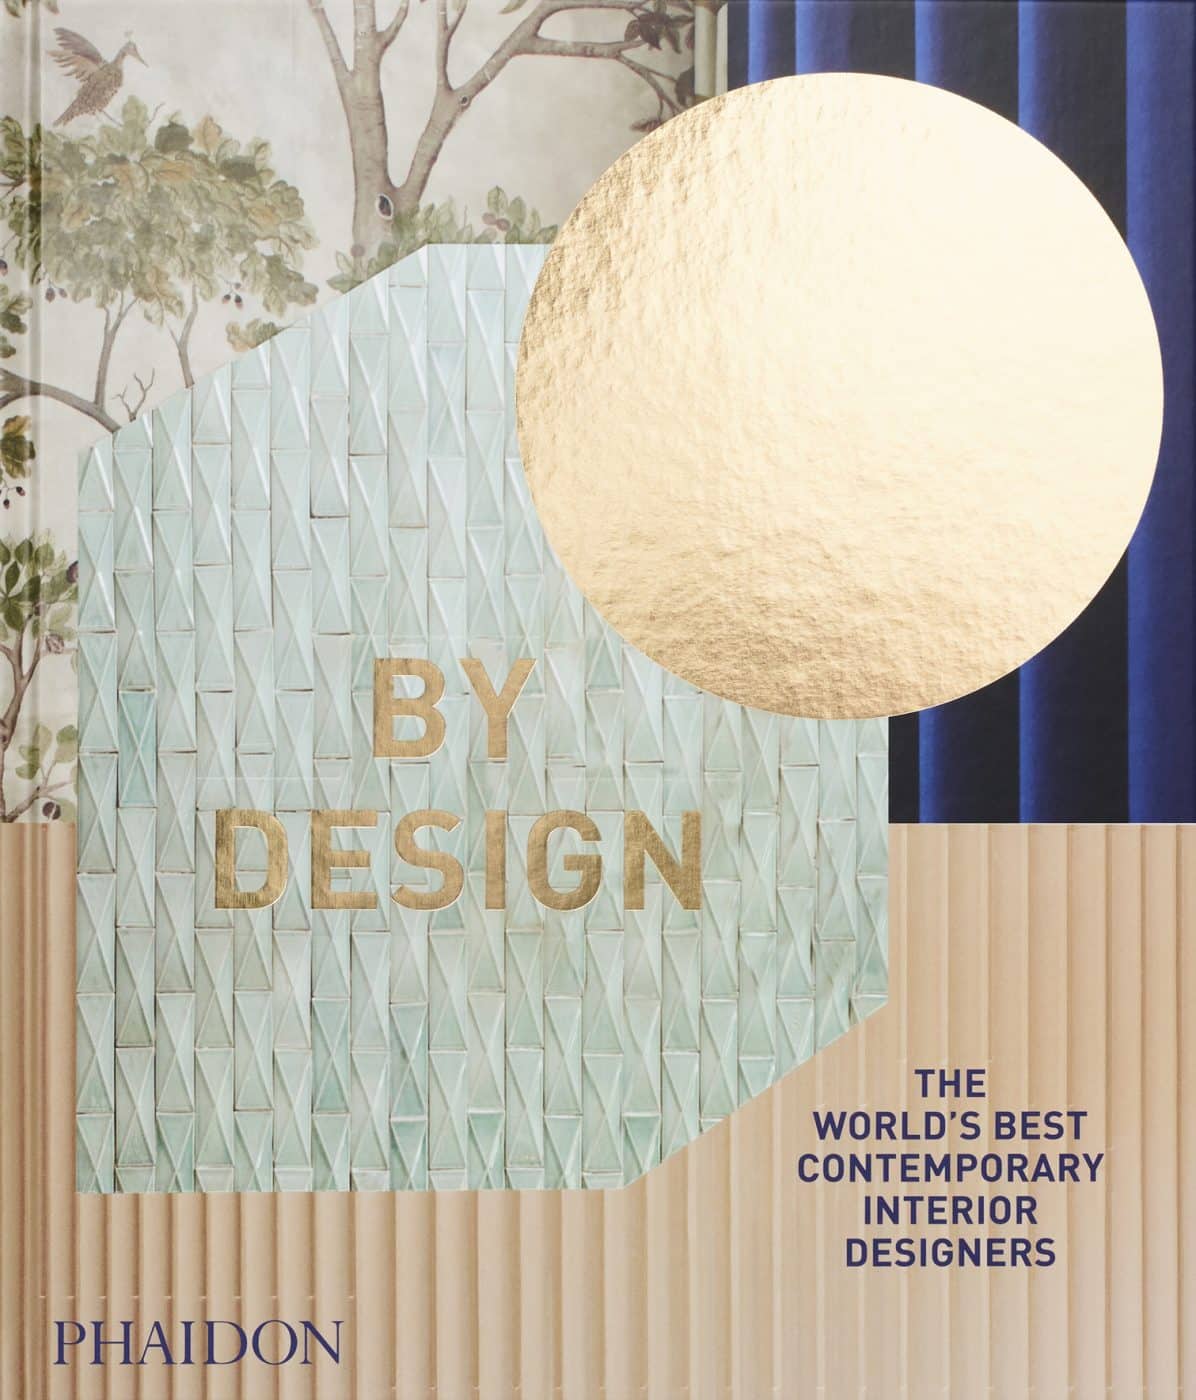 BY DESIGN: THE WORLD’S BEST CONTEMPORARY INTERIOR DESIGNERS